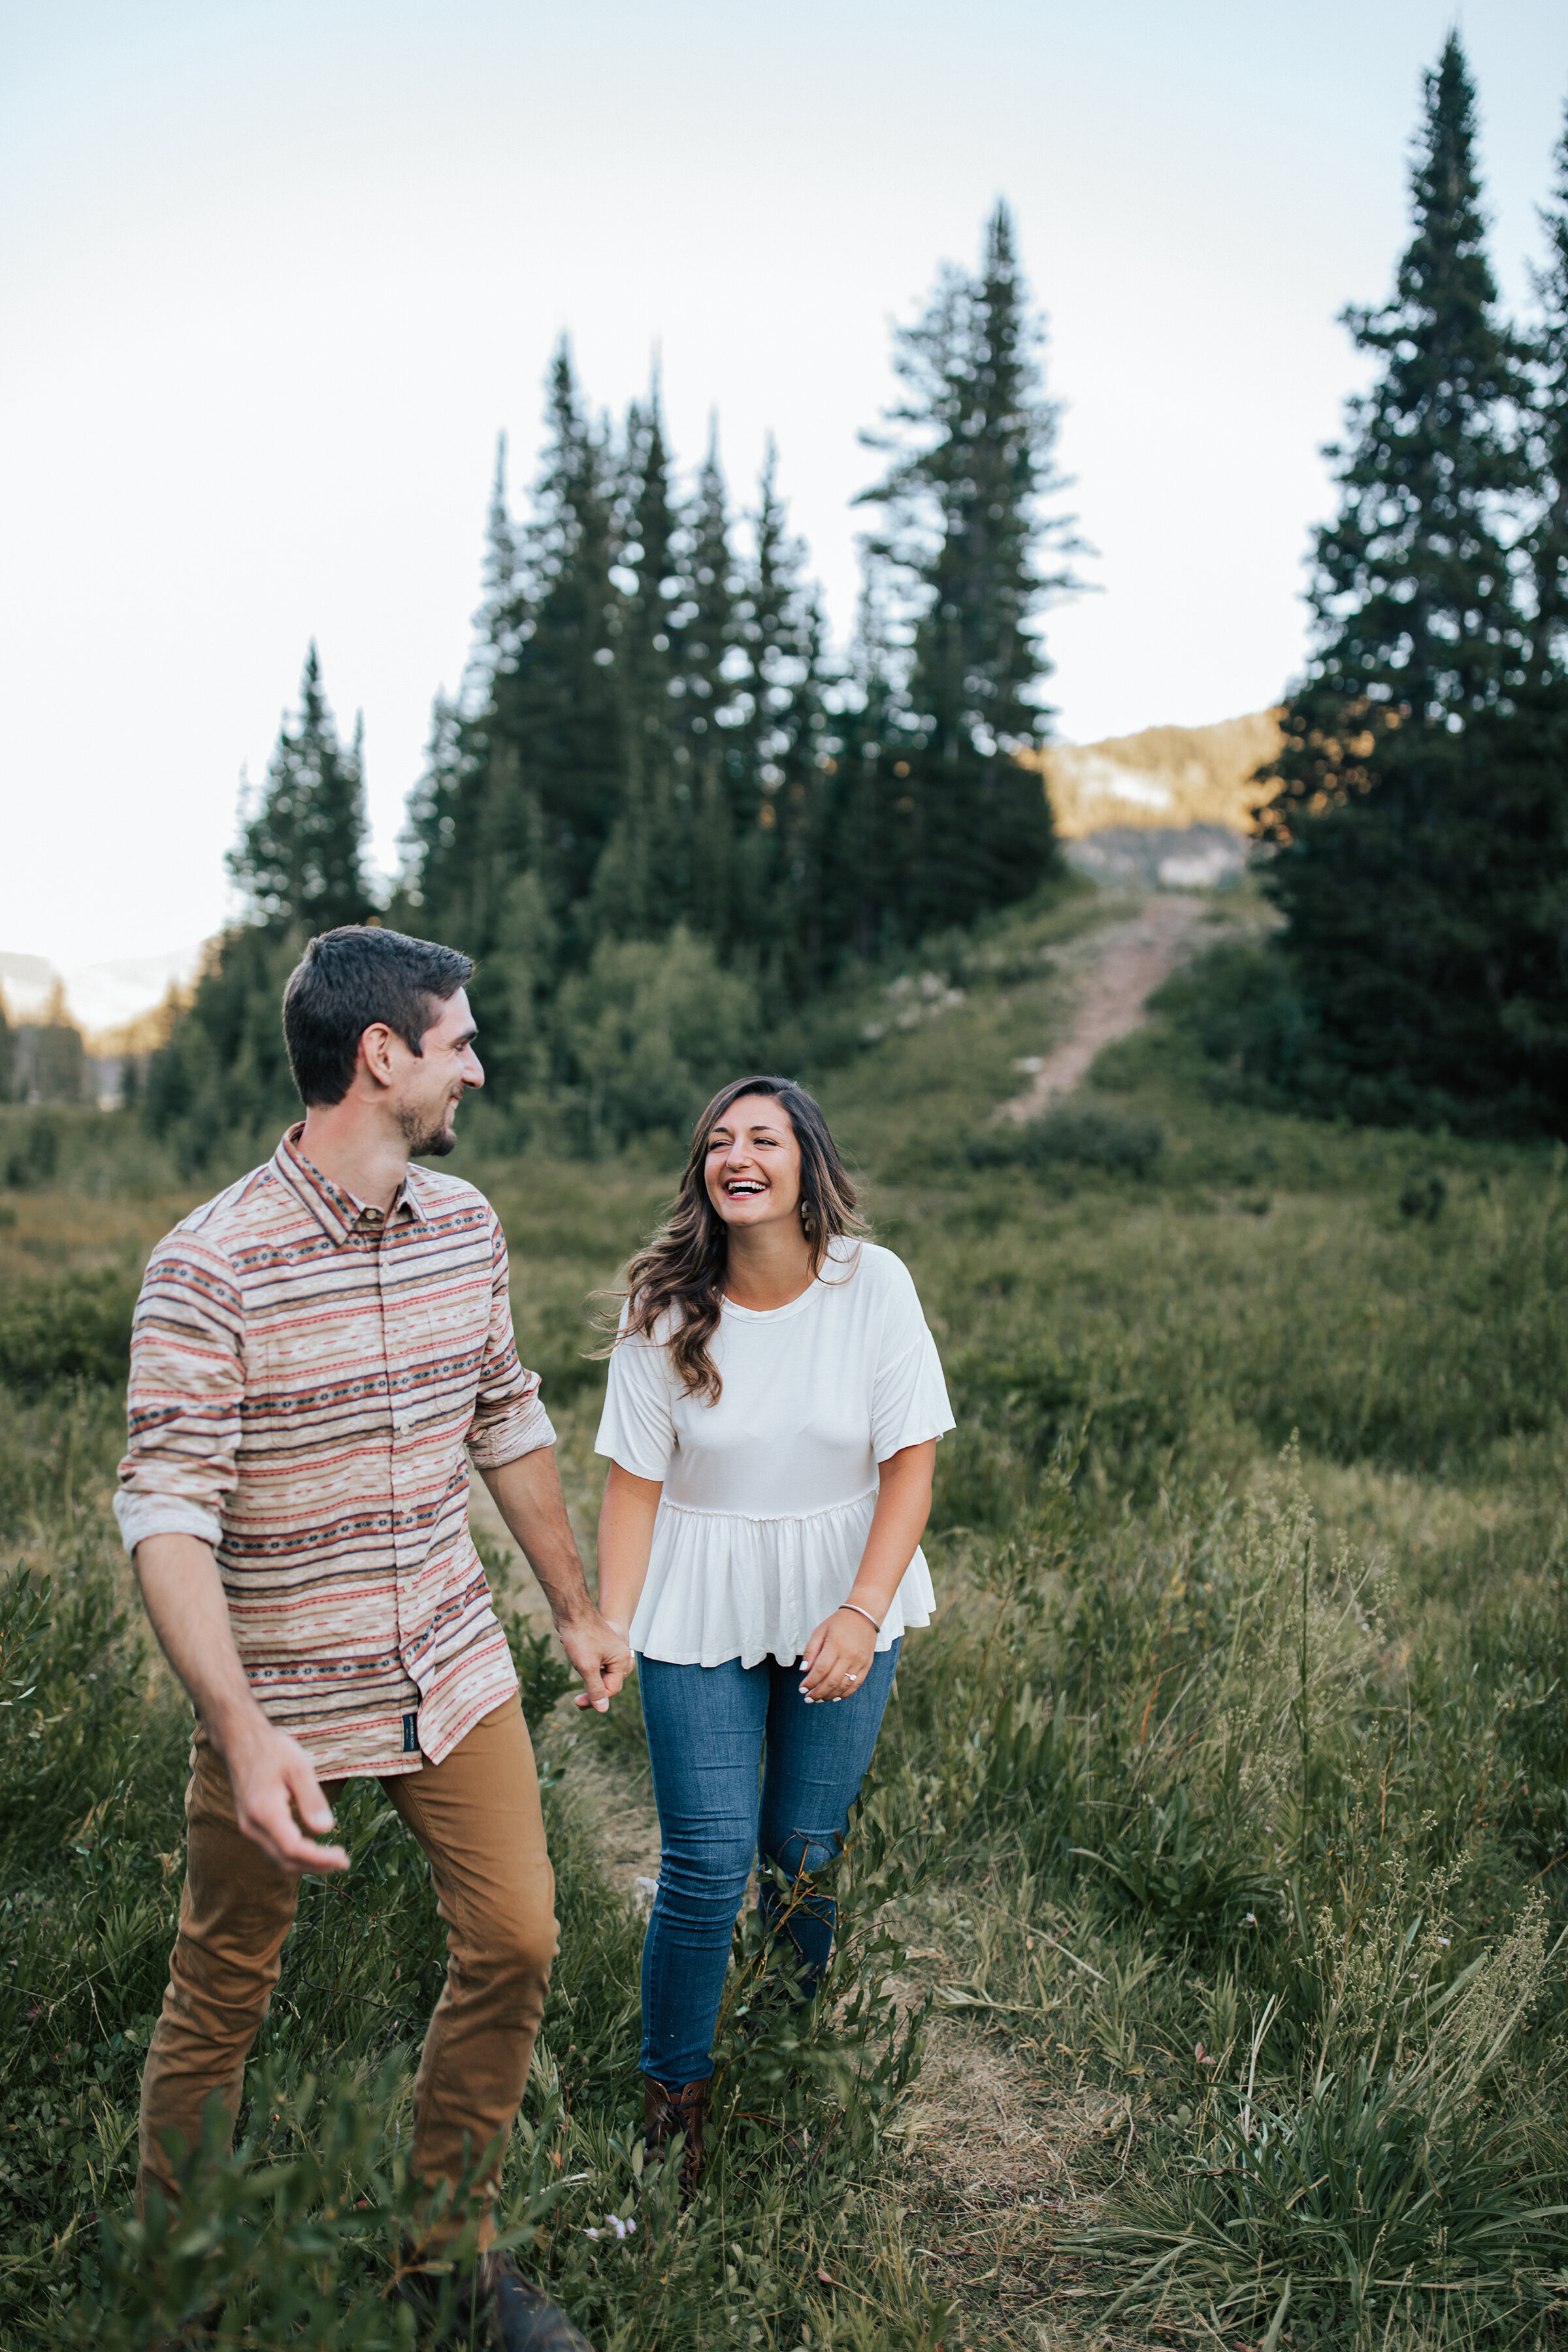  A couple giggle together and they walk through the wooded area in a beautiful engagement session by Emily Jenkins Photography. Professional Utah engagement photographer couple goals client attire inspiration casual engagement attire inspiration outd